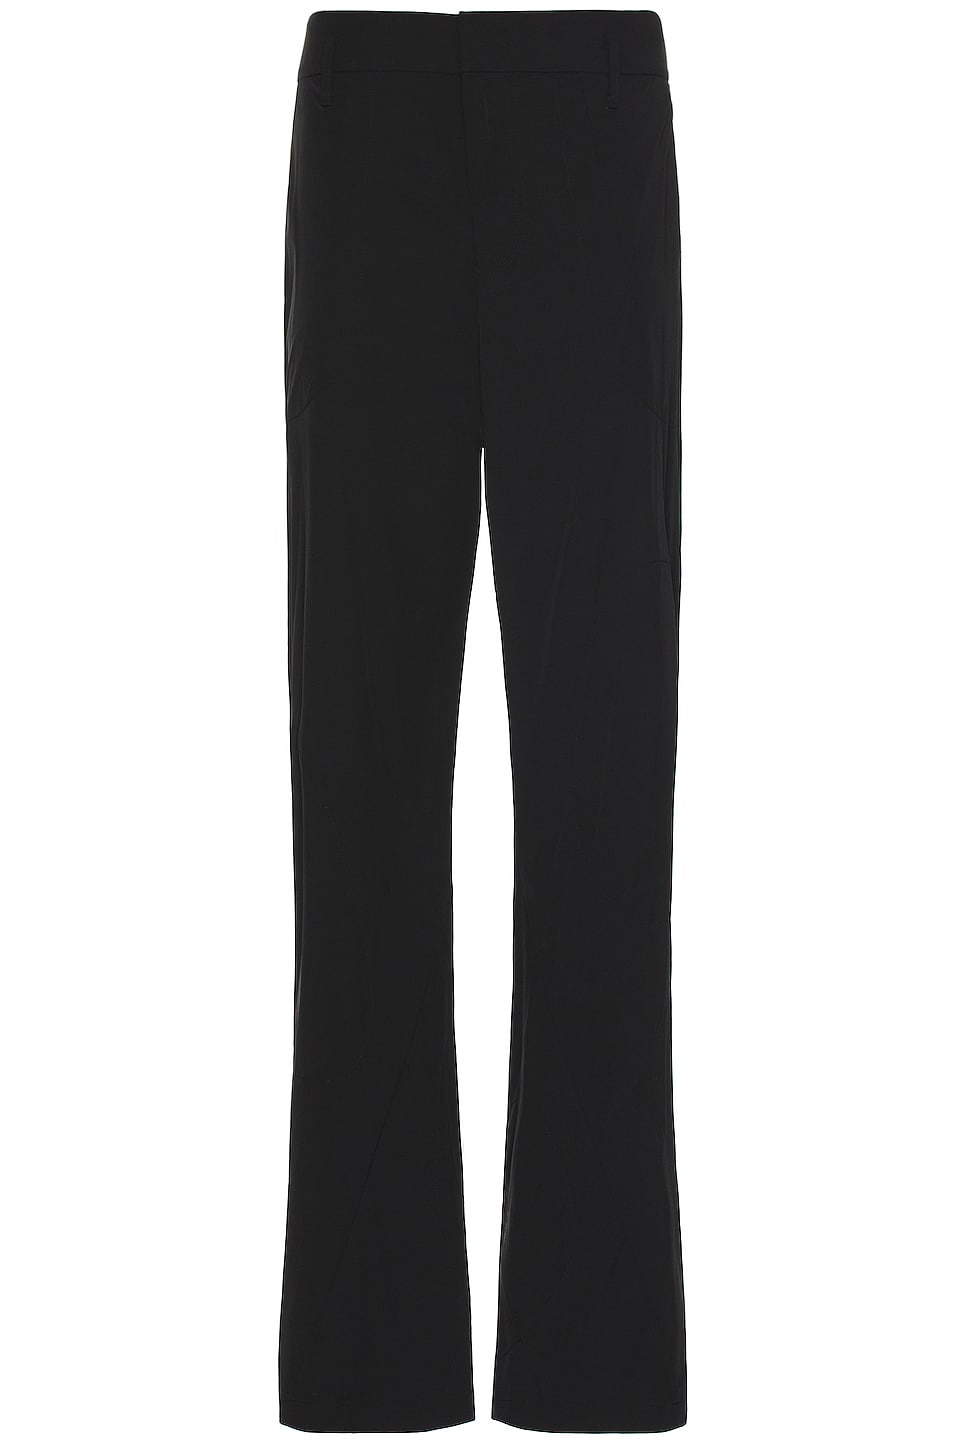 Image 1 of POST ARCHIVE FACTION (PAF) 5.1 Trousers Center in BLACK